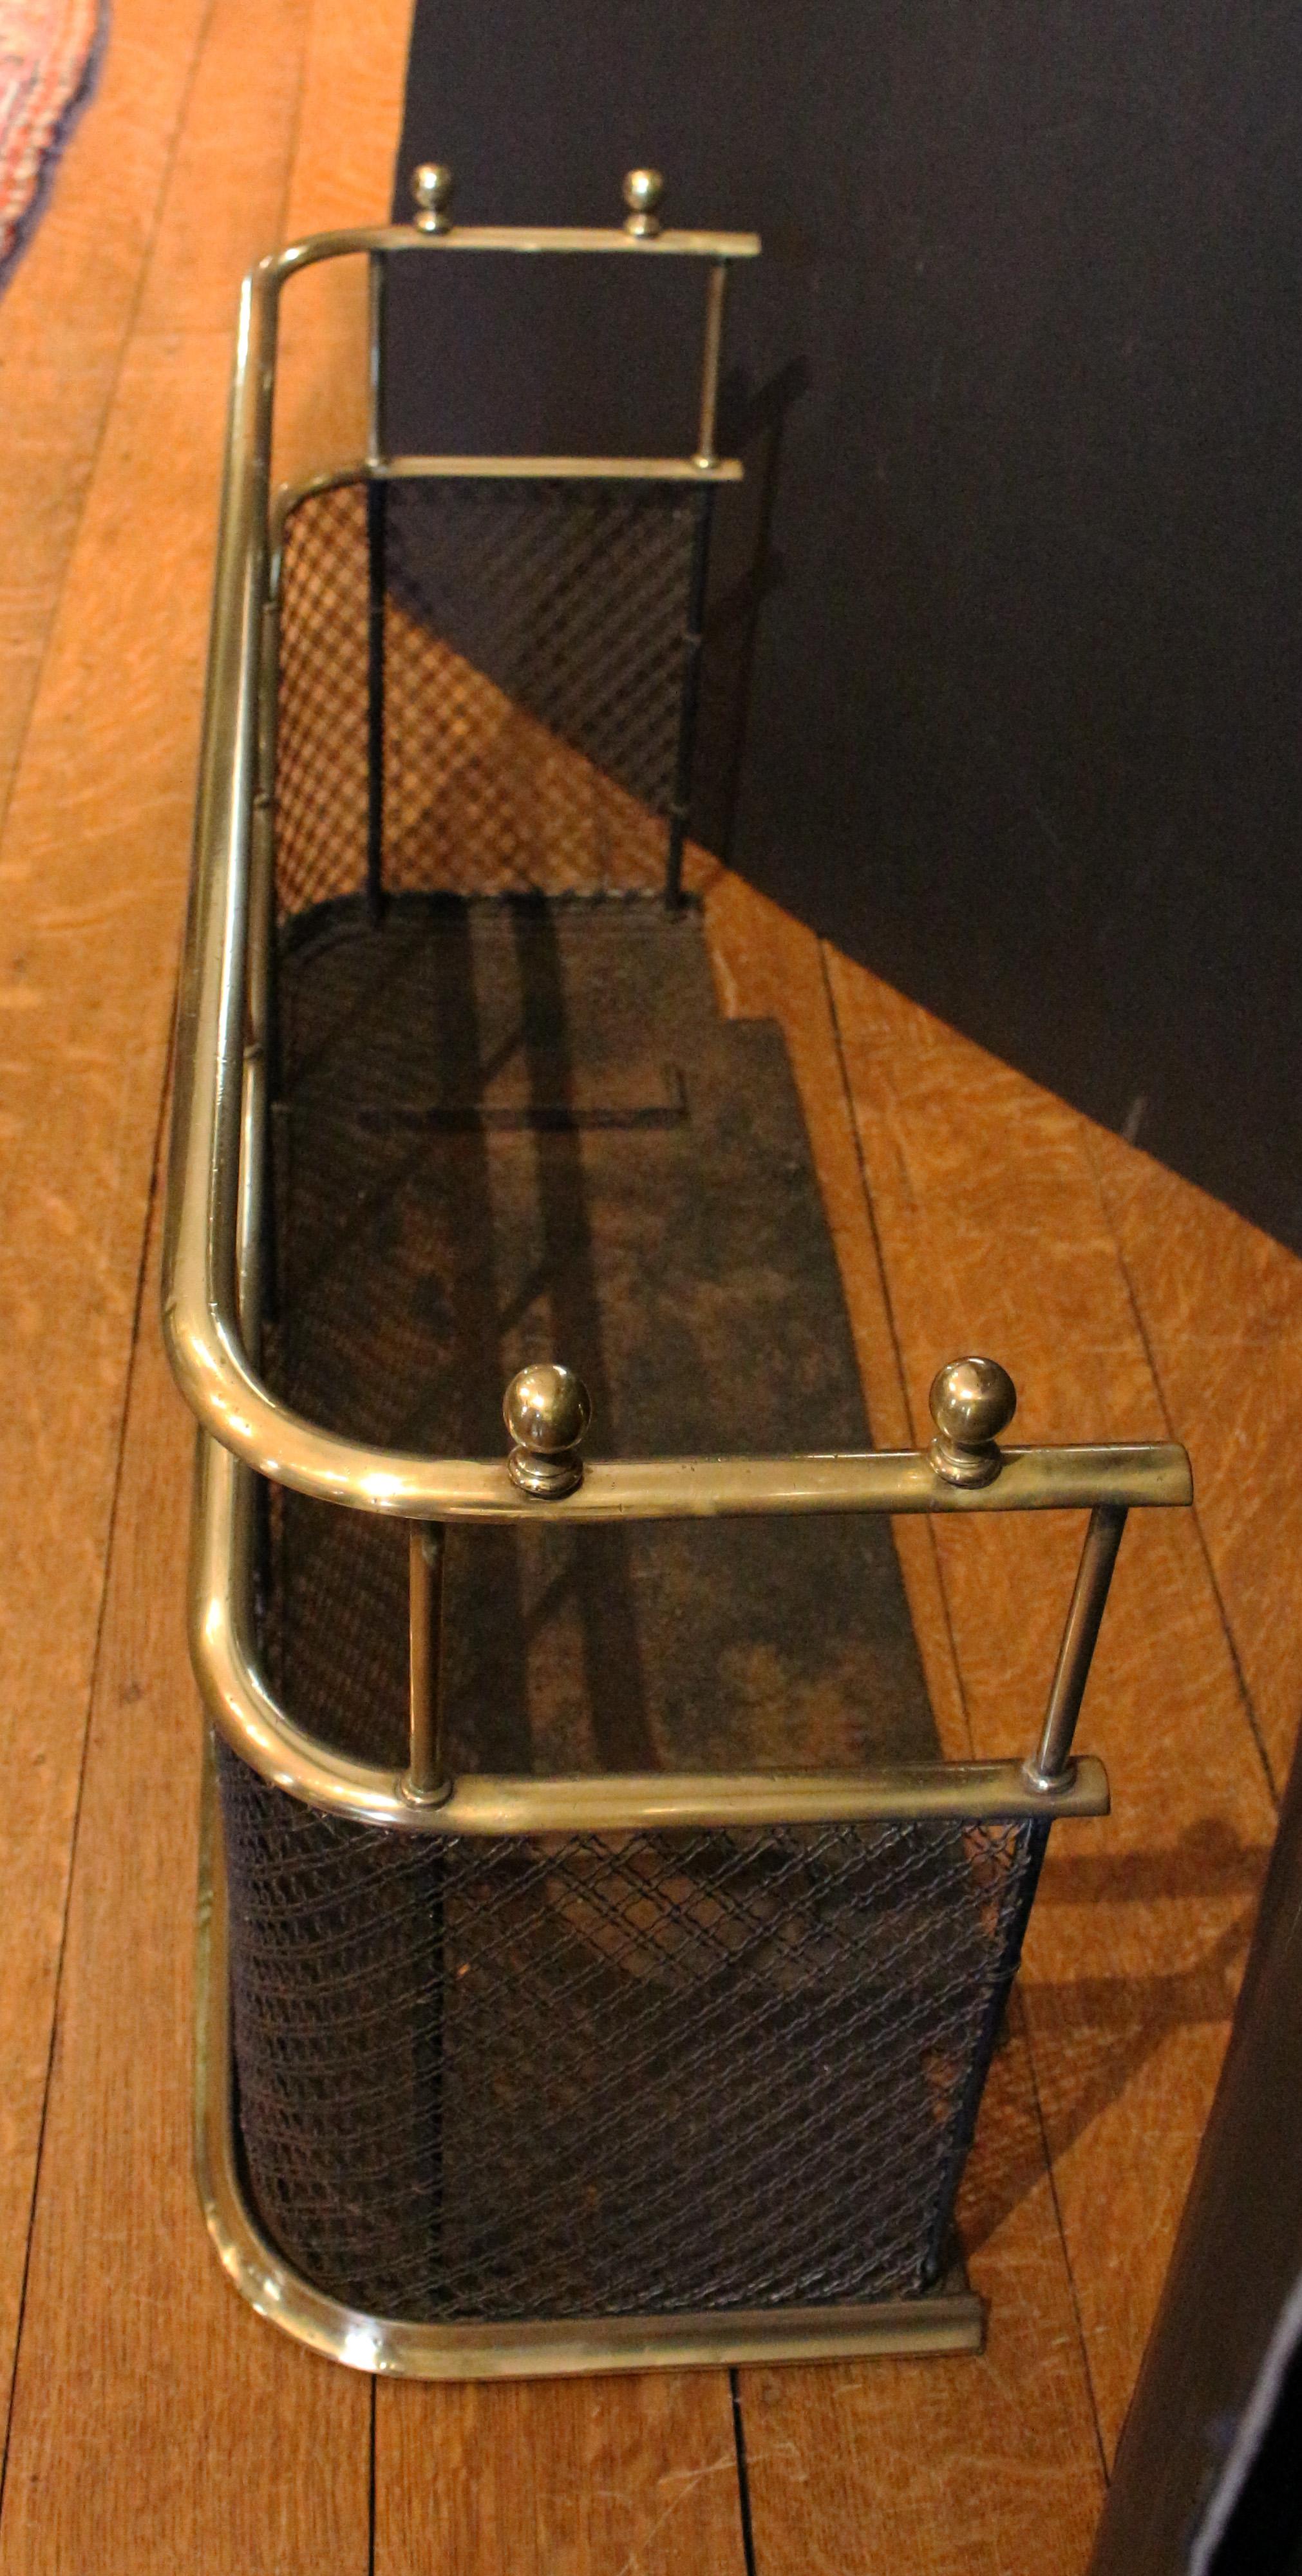 19th Century Mid-19th century English Brass Fire Fender with Double Cross Iron Mesh